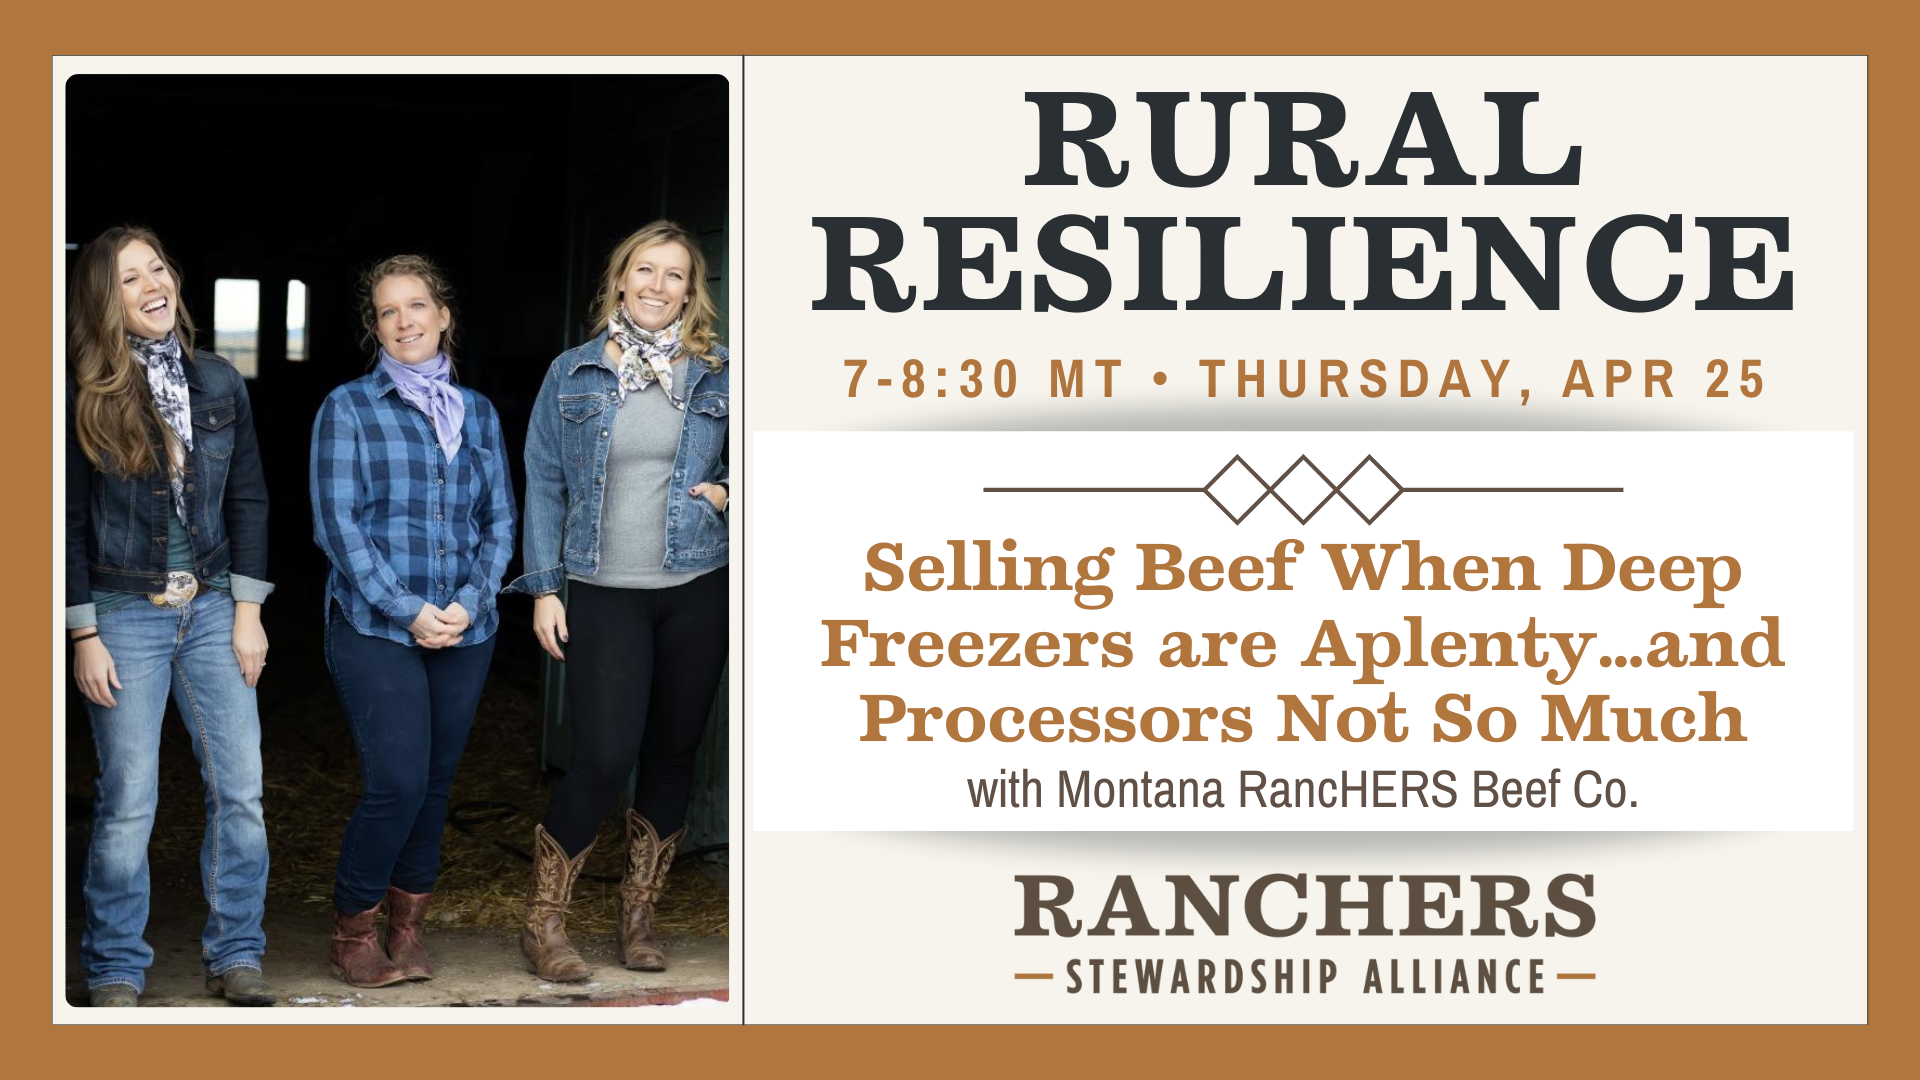 Rural Resilience • Selling Beef When Deep Freezers are Aplenty…and Processors Not So Much